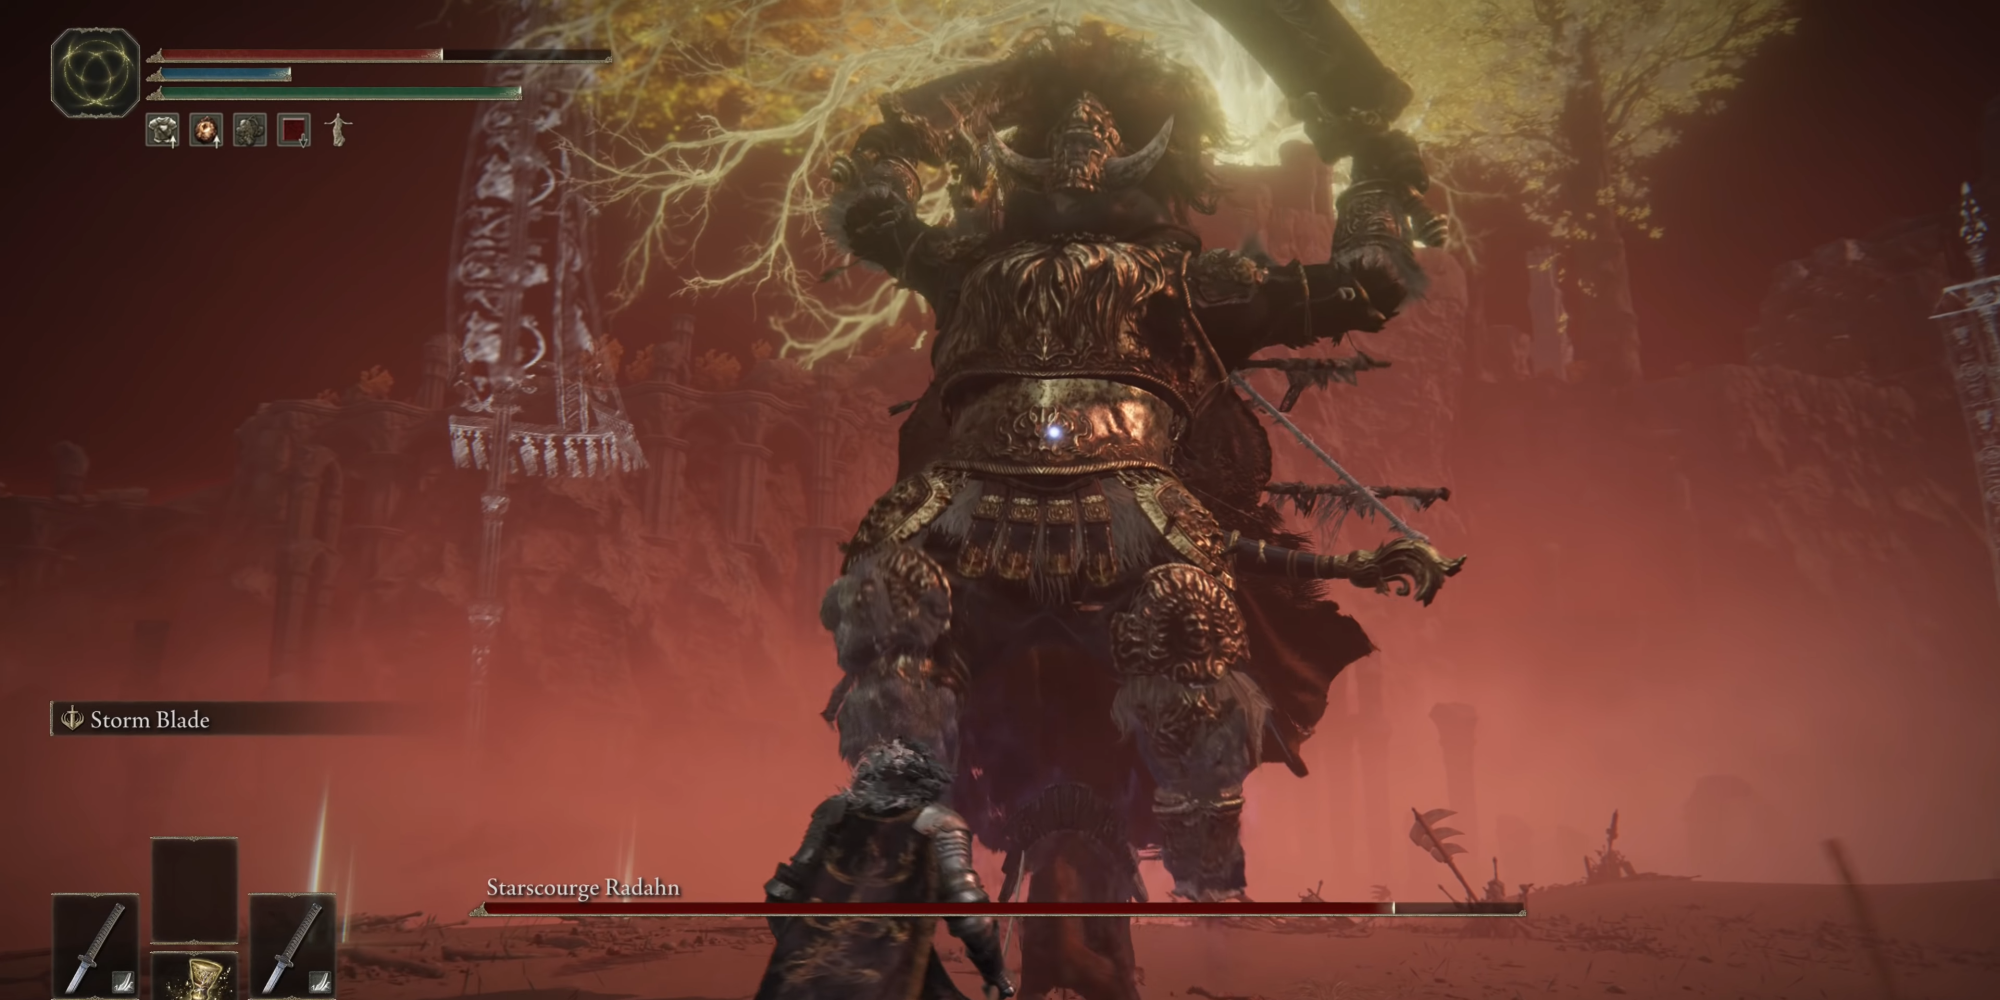 This image shows Starscourge Radahn using his jump attack in Elden Ring.